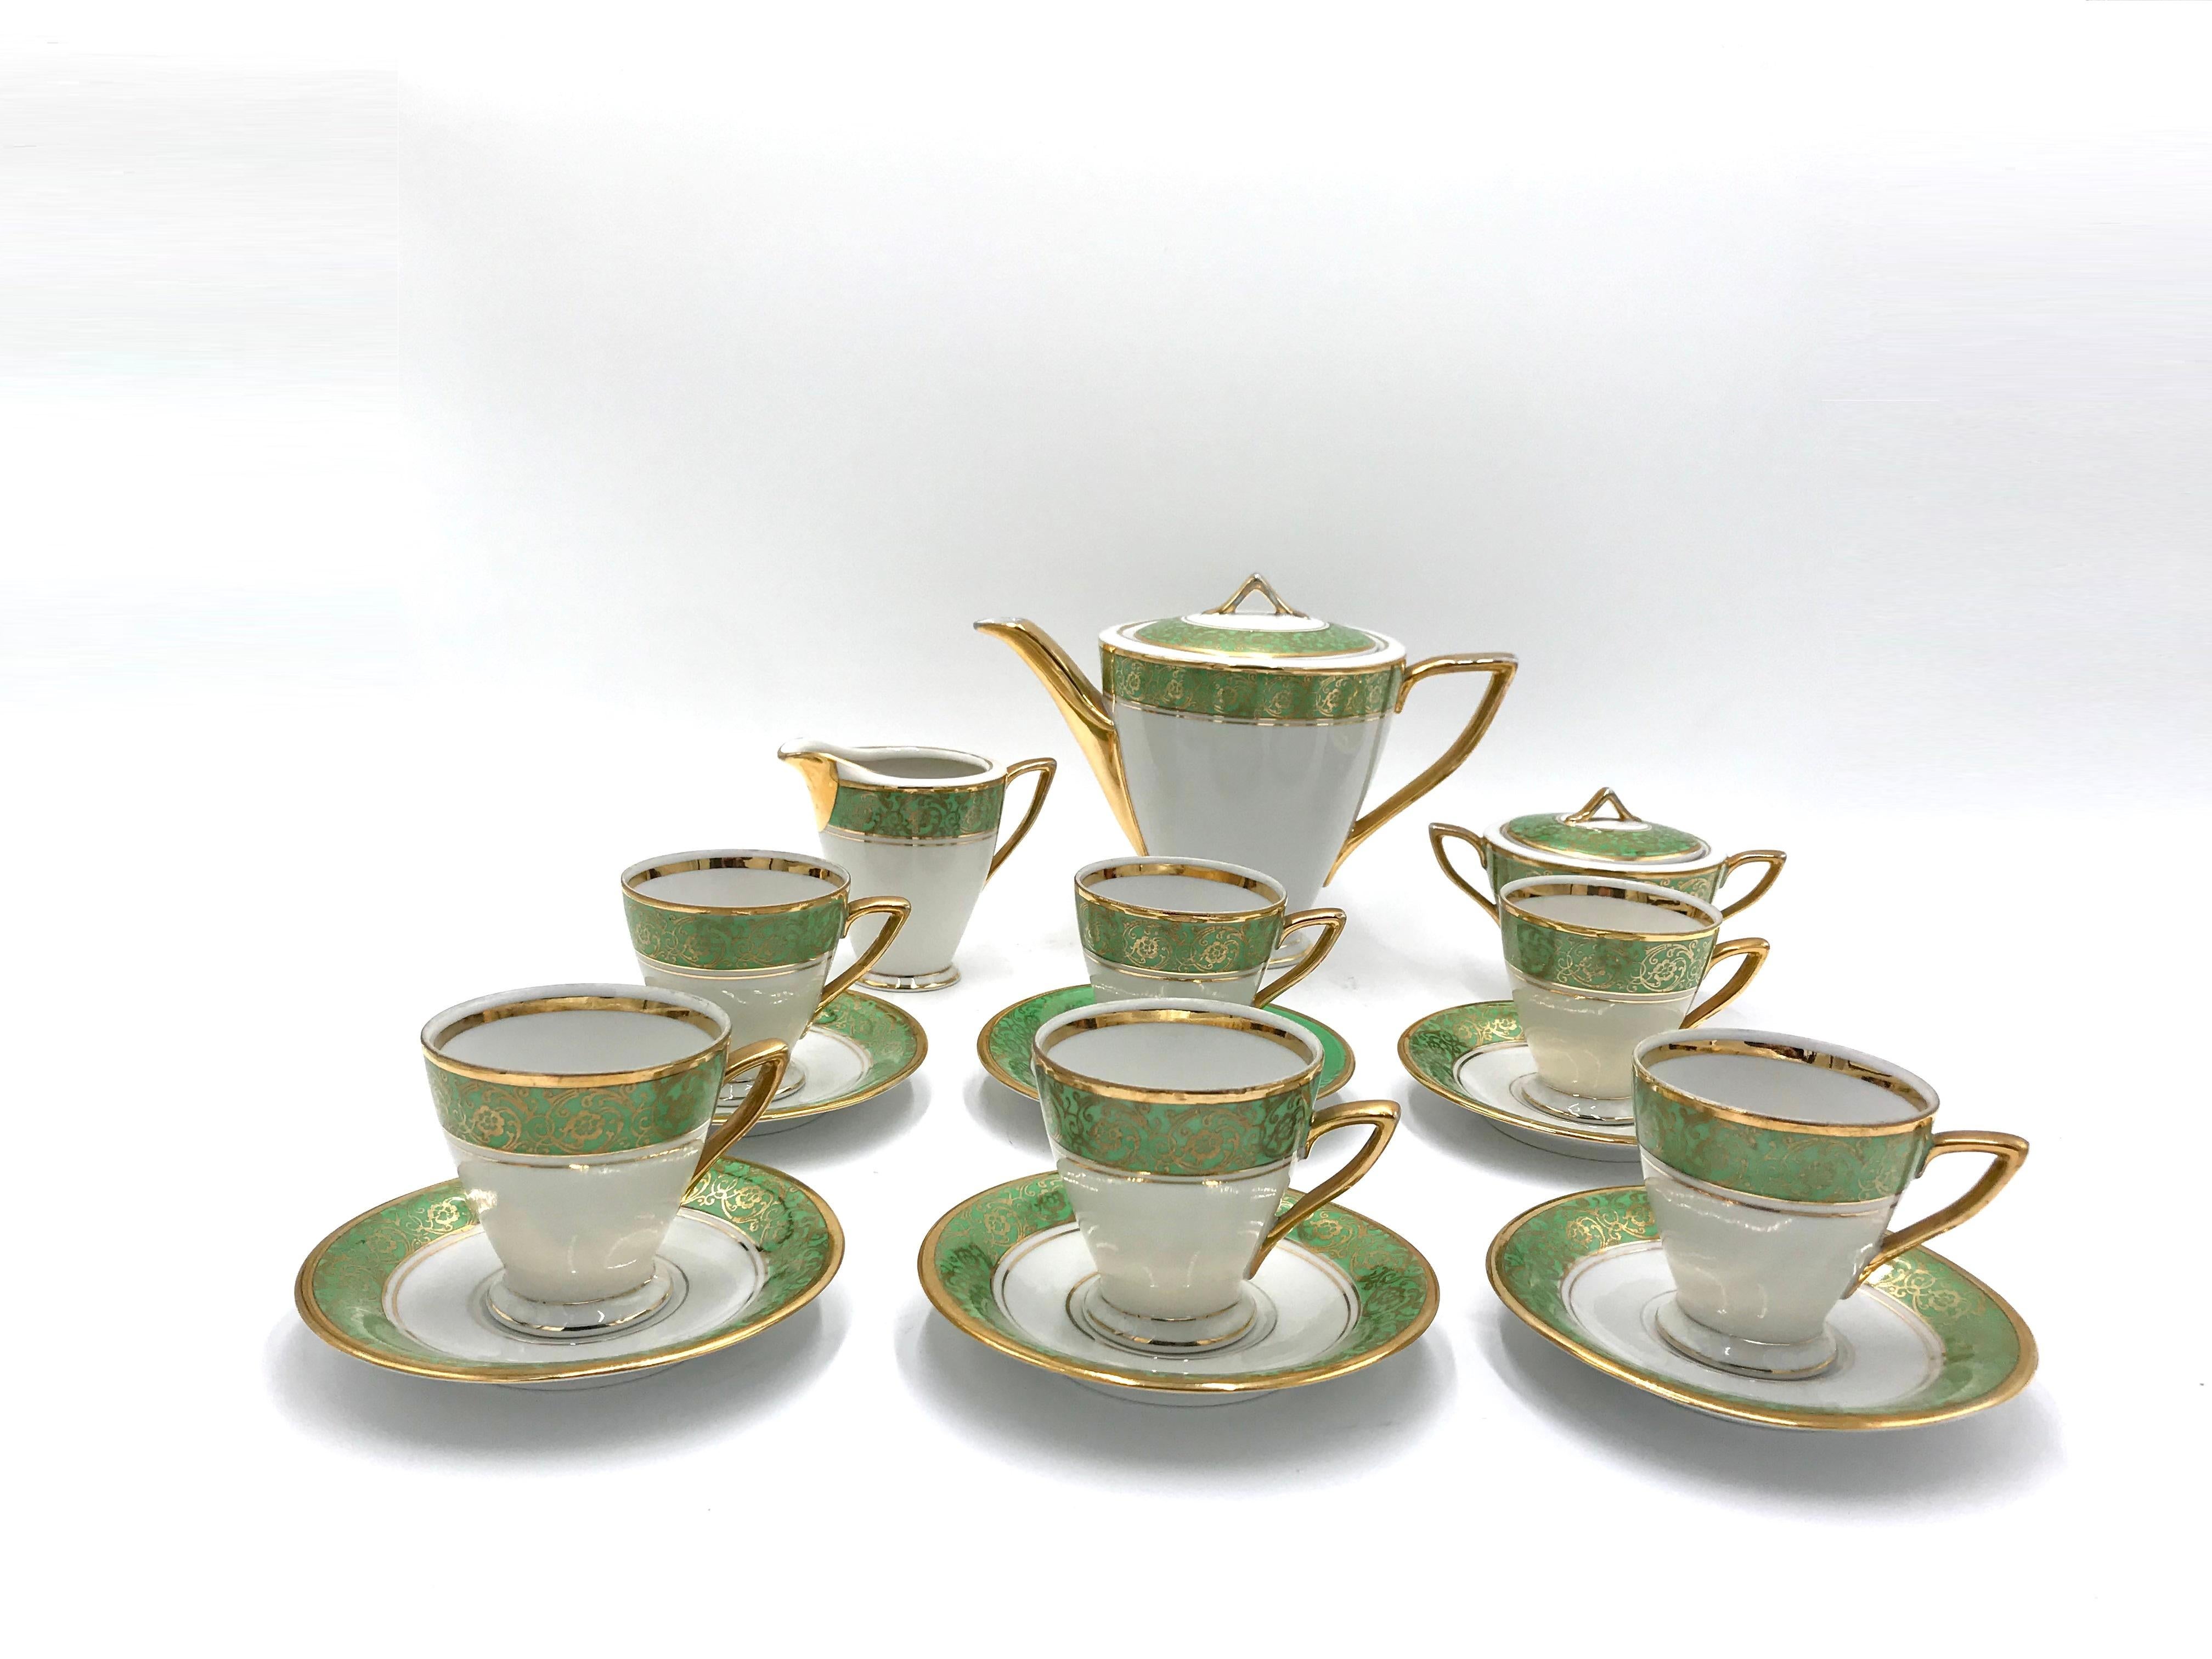 Porcelain coffee set, a rare design of the Karolina set from the mid-twentieth century.

The service includes a jug, milk jug, sugar bowl, 6 cups and 6 saucers. One saucer has more abraded gilding.

Very good condition, no nicks.

Measures: